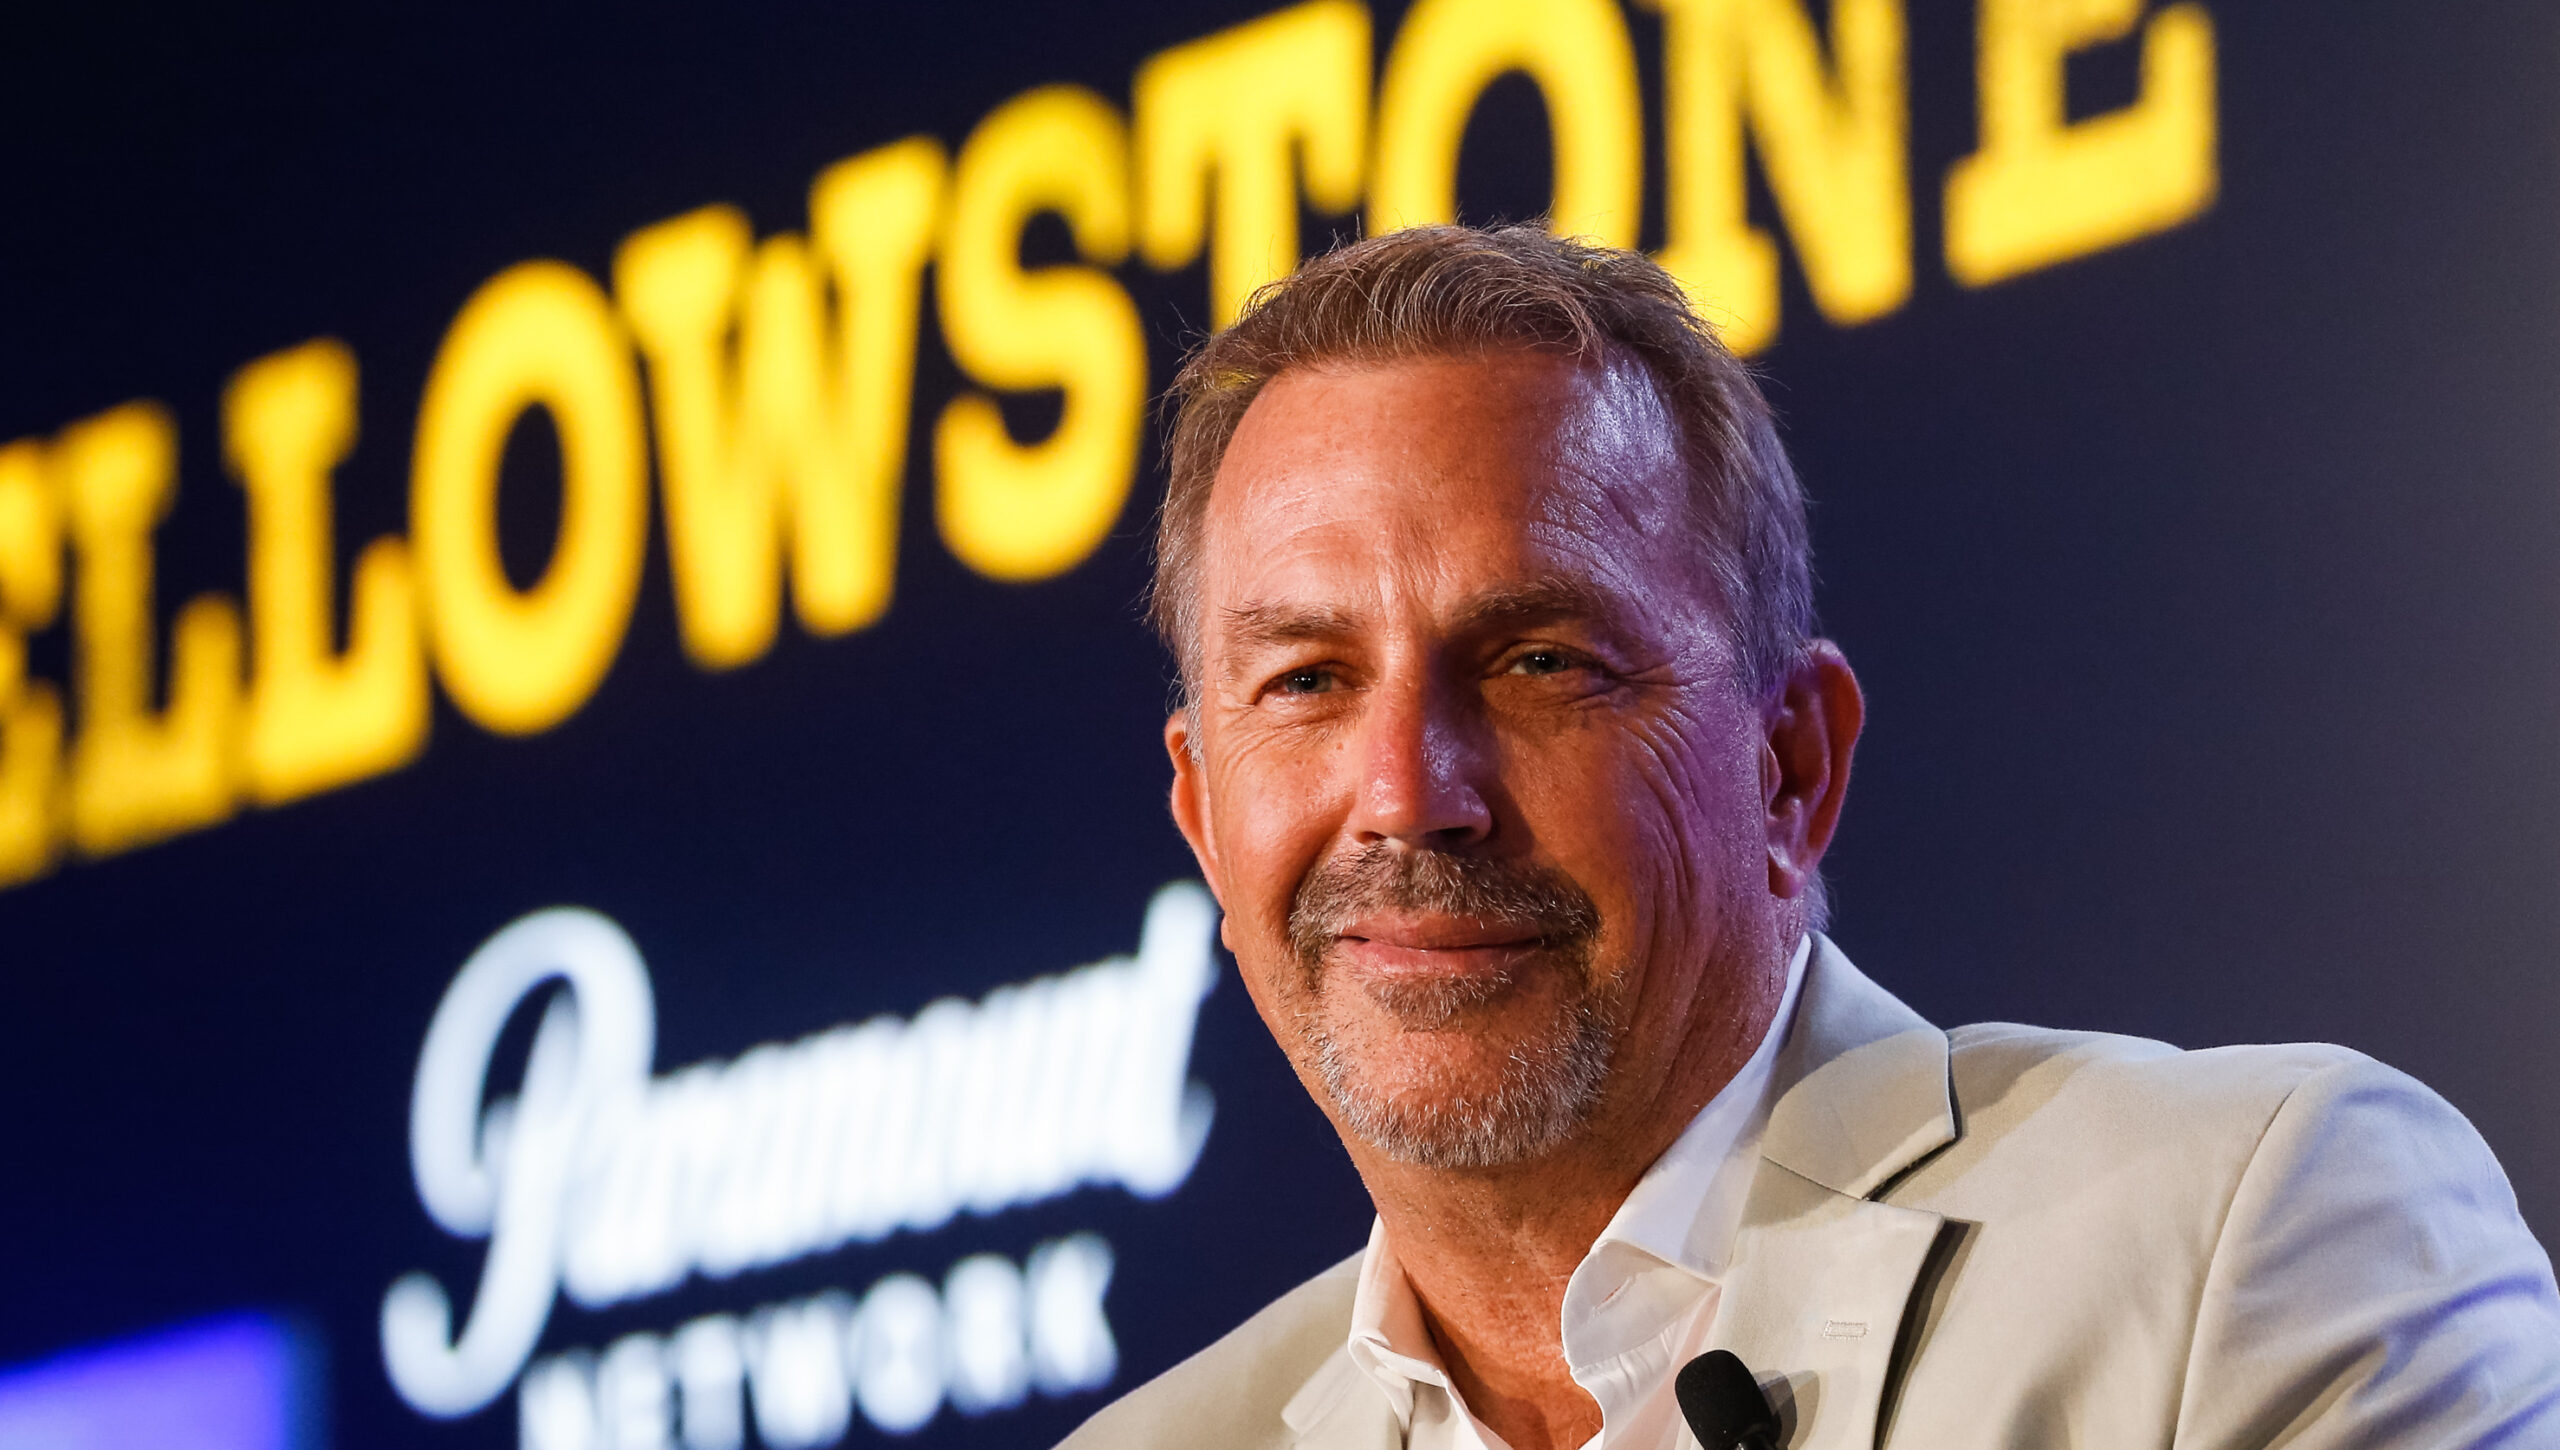 Kevin Costner is open to returning to ‘Yellowstone’ under the right conditions